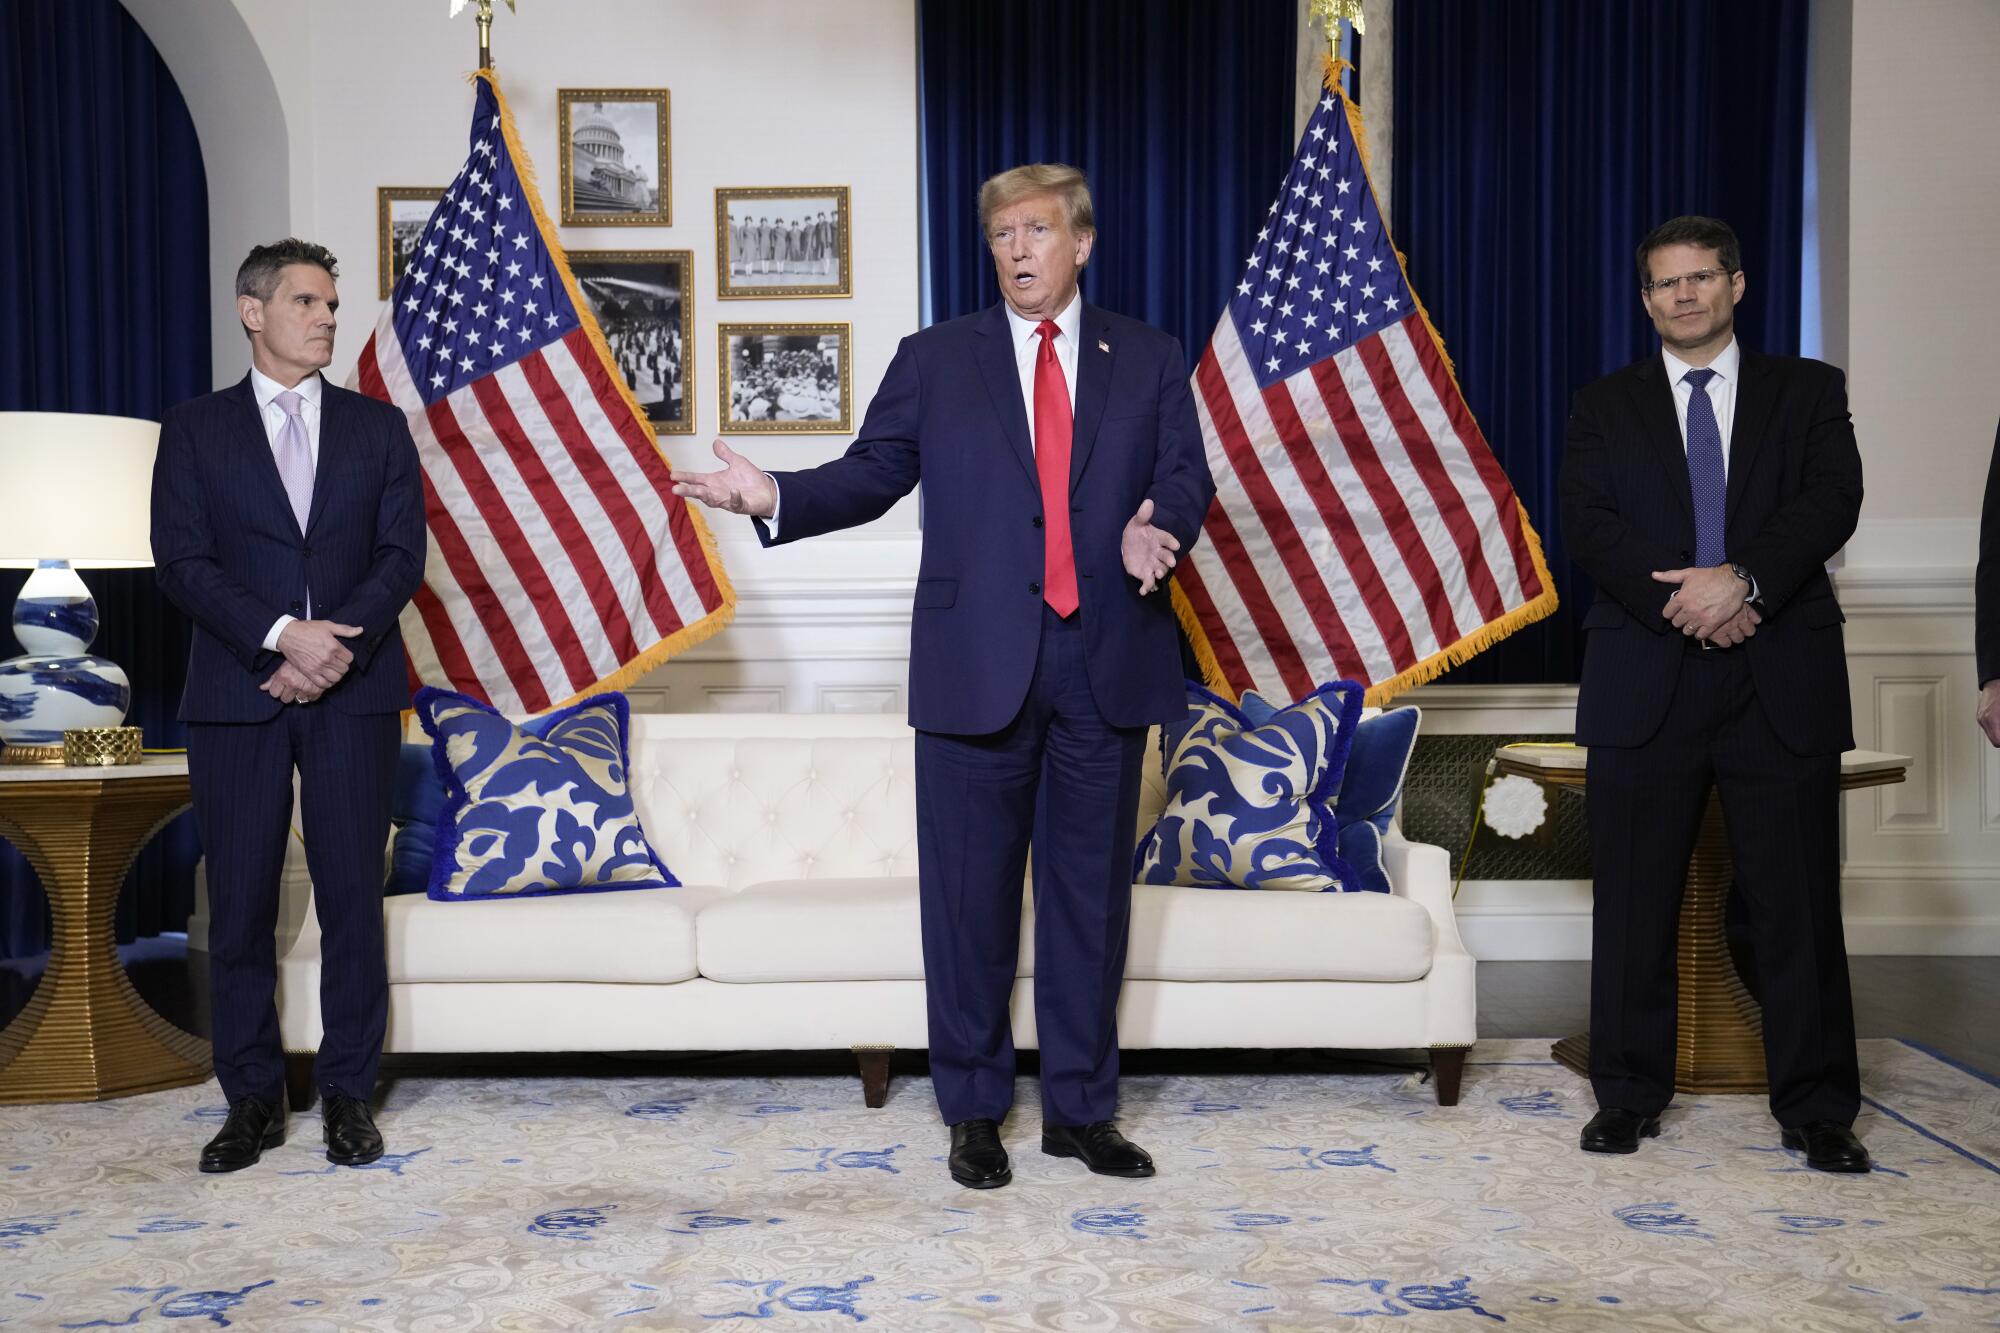 Former President Trump, flanked by two men in suits, stands and speaks in a white room with blue accents and two U.S. flags